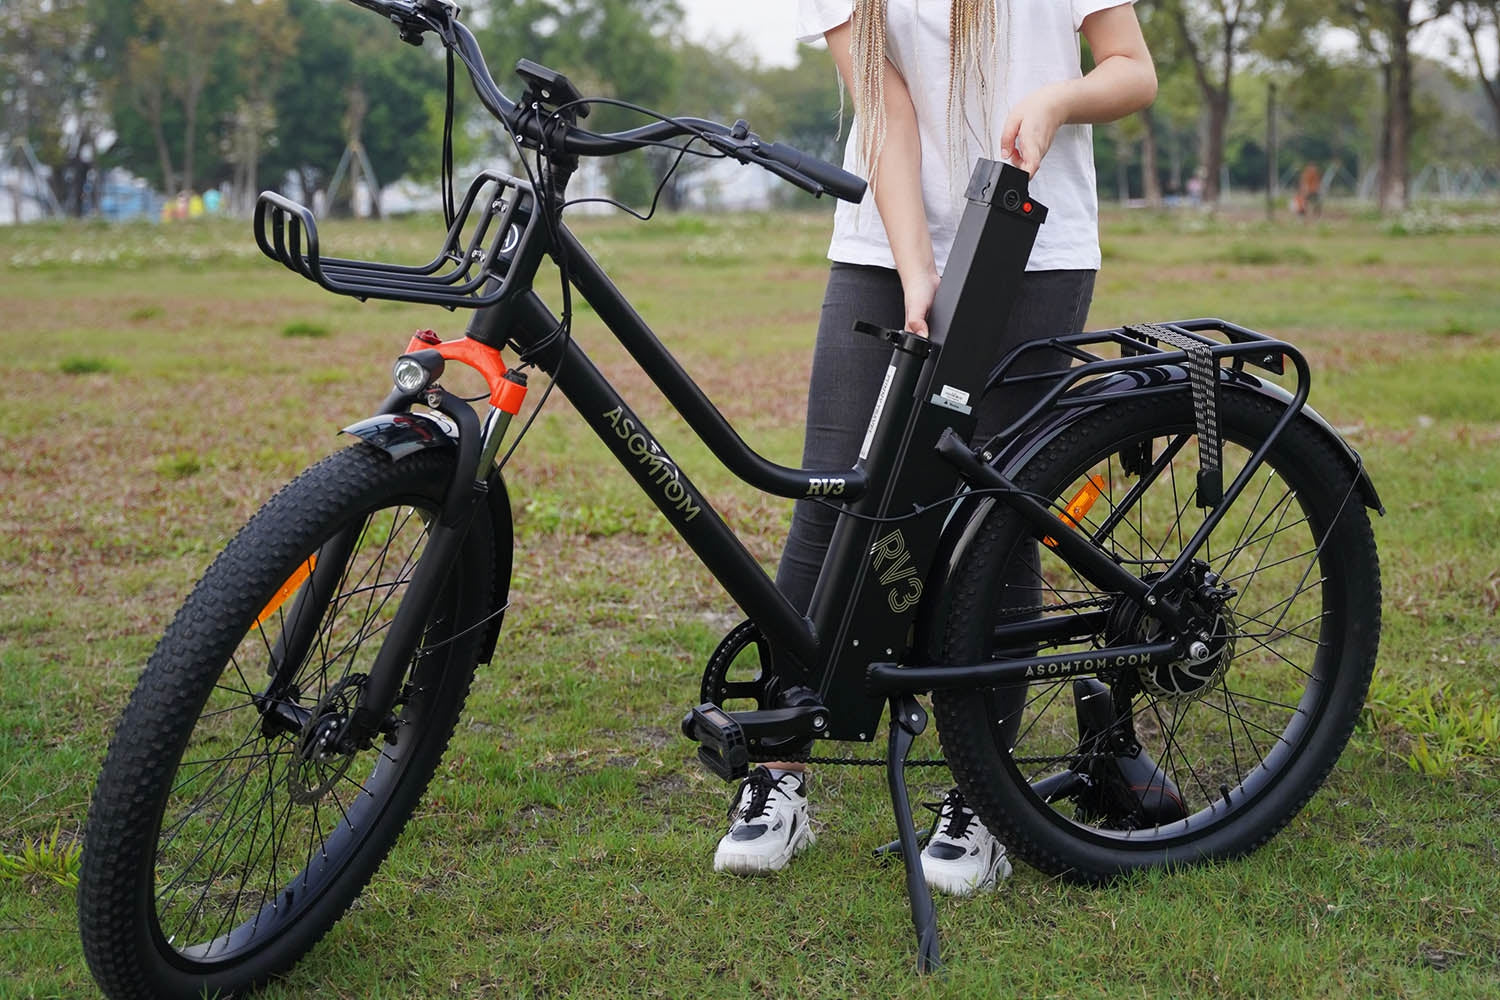 When should the battery of an electric bike be replaced? – ASOMTOM